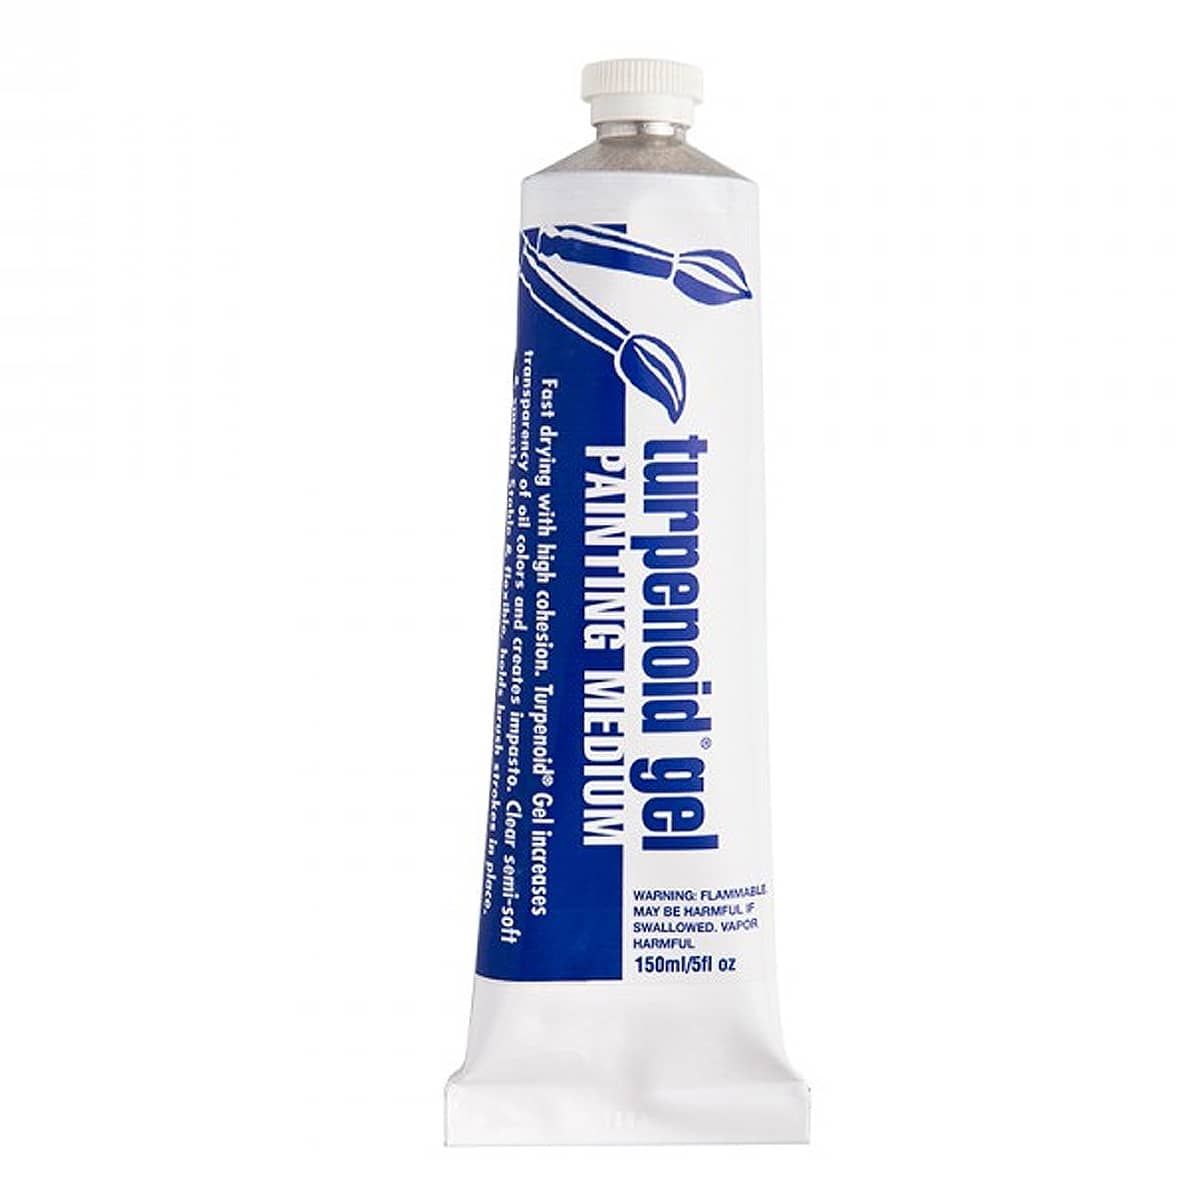 Turpenoid Natural - Size: 32 oz. (946ml) - NOT FOR SALE IN THE FOLLOWING  STATES: CA, CO, CT, DE, MD, NH, NY, OH, RI or UT